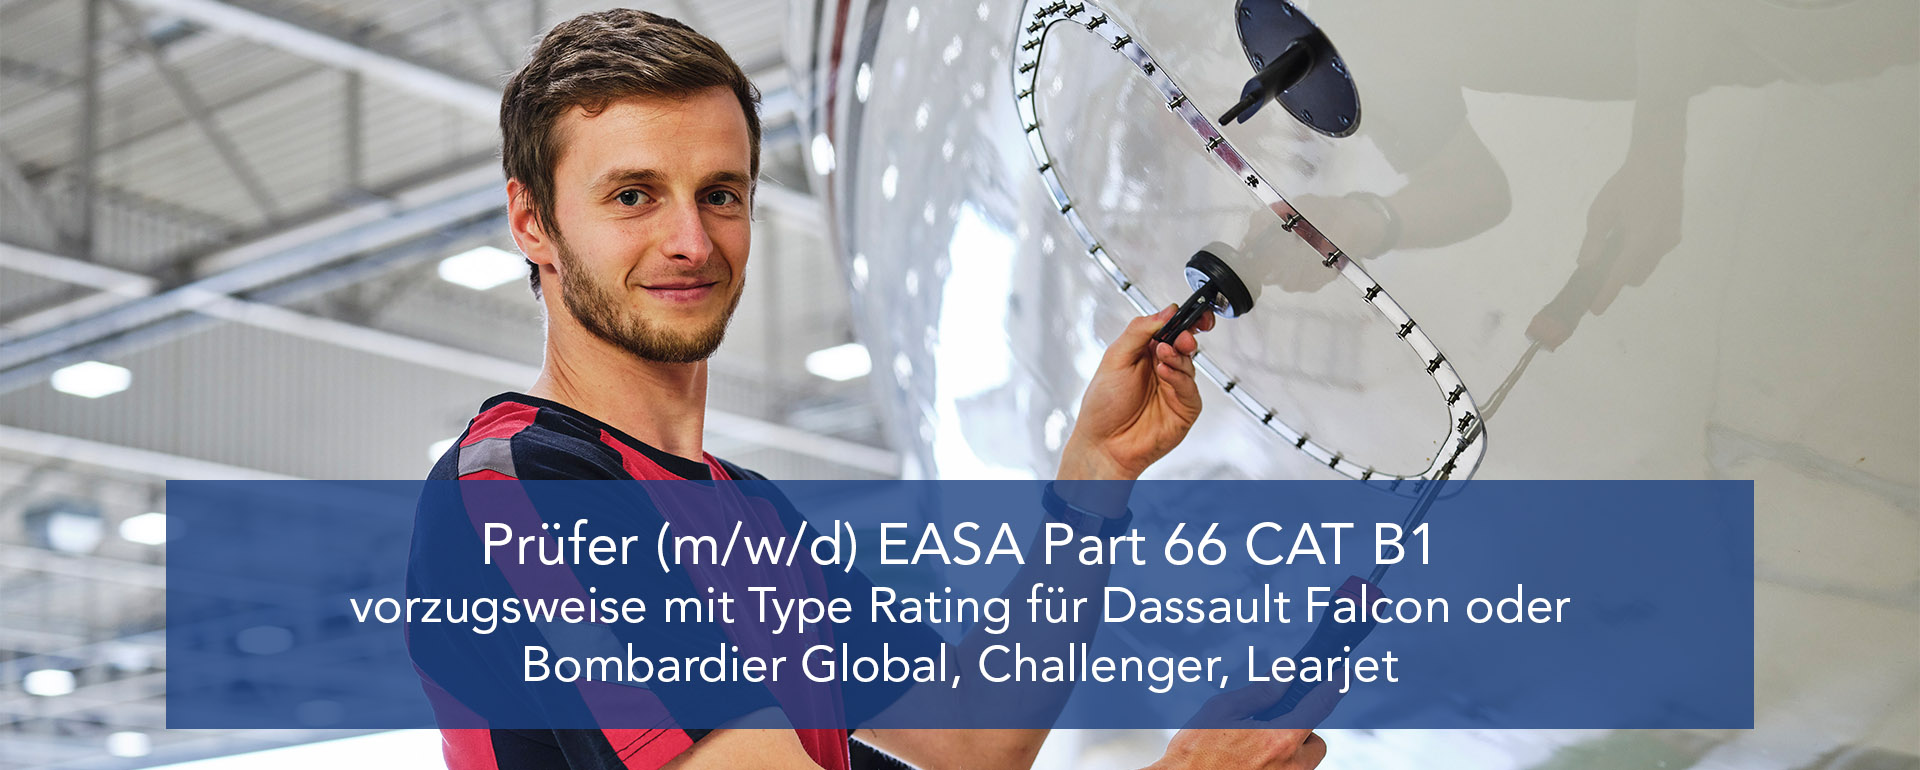 Prüfer (m/w/d) EASA Part 66 CAT B1 in EDMO Type Rating Dassault Falcon oder Bombardier Global, Challenger oder Learjet